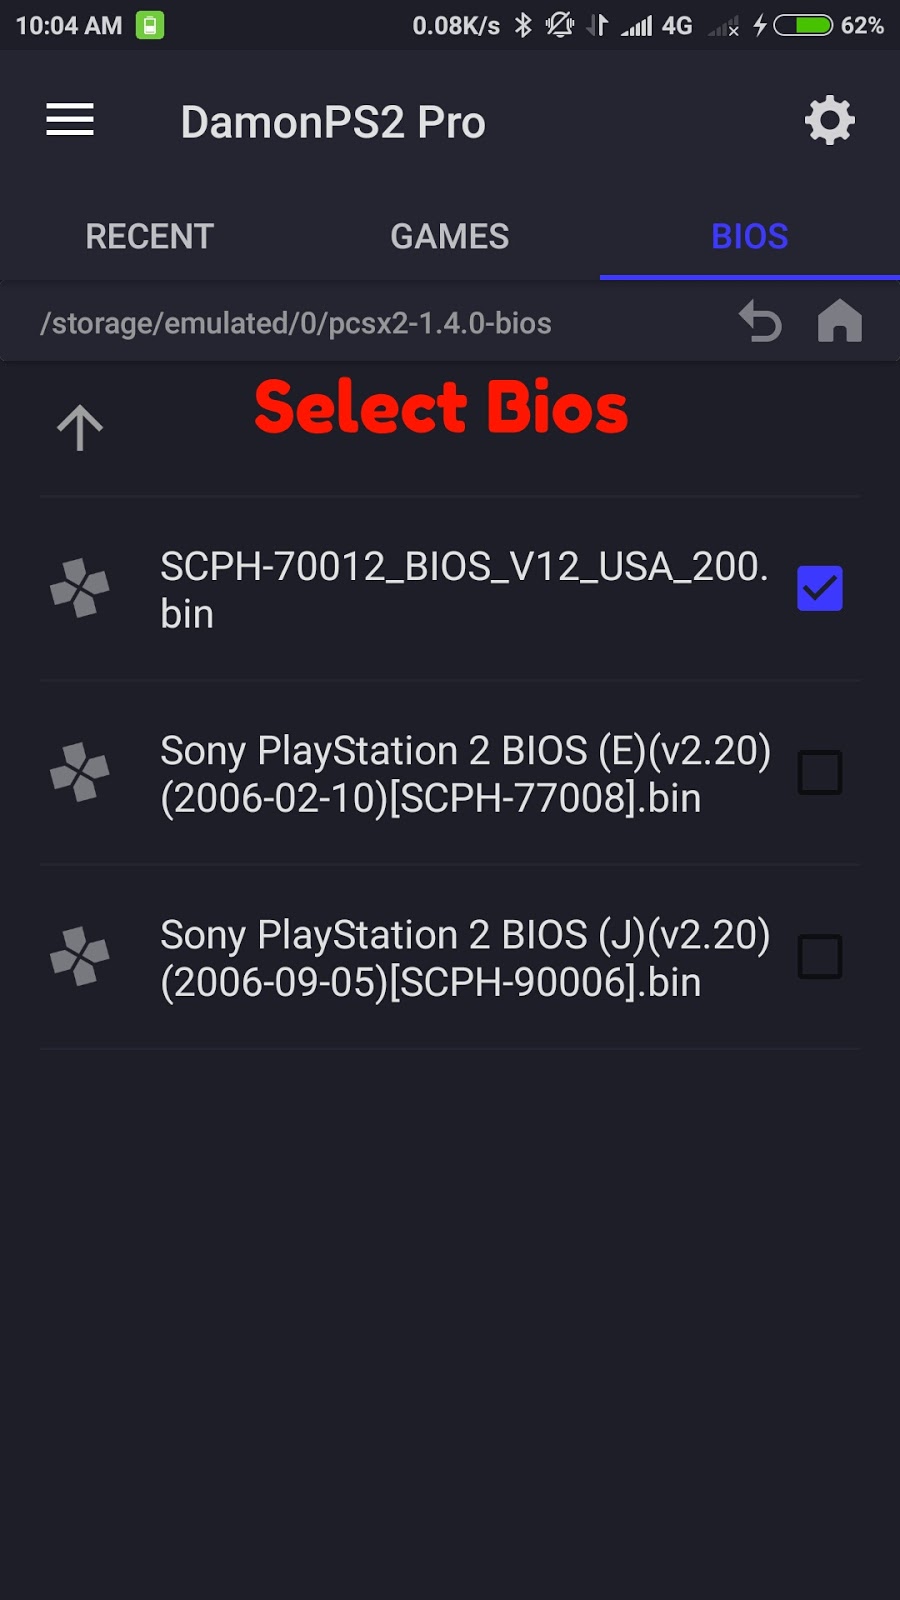 Complete ps2 emulator with bios